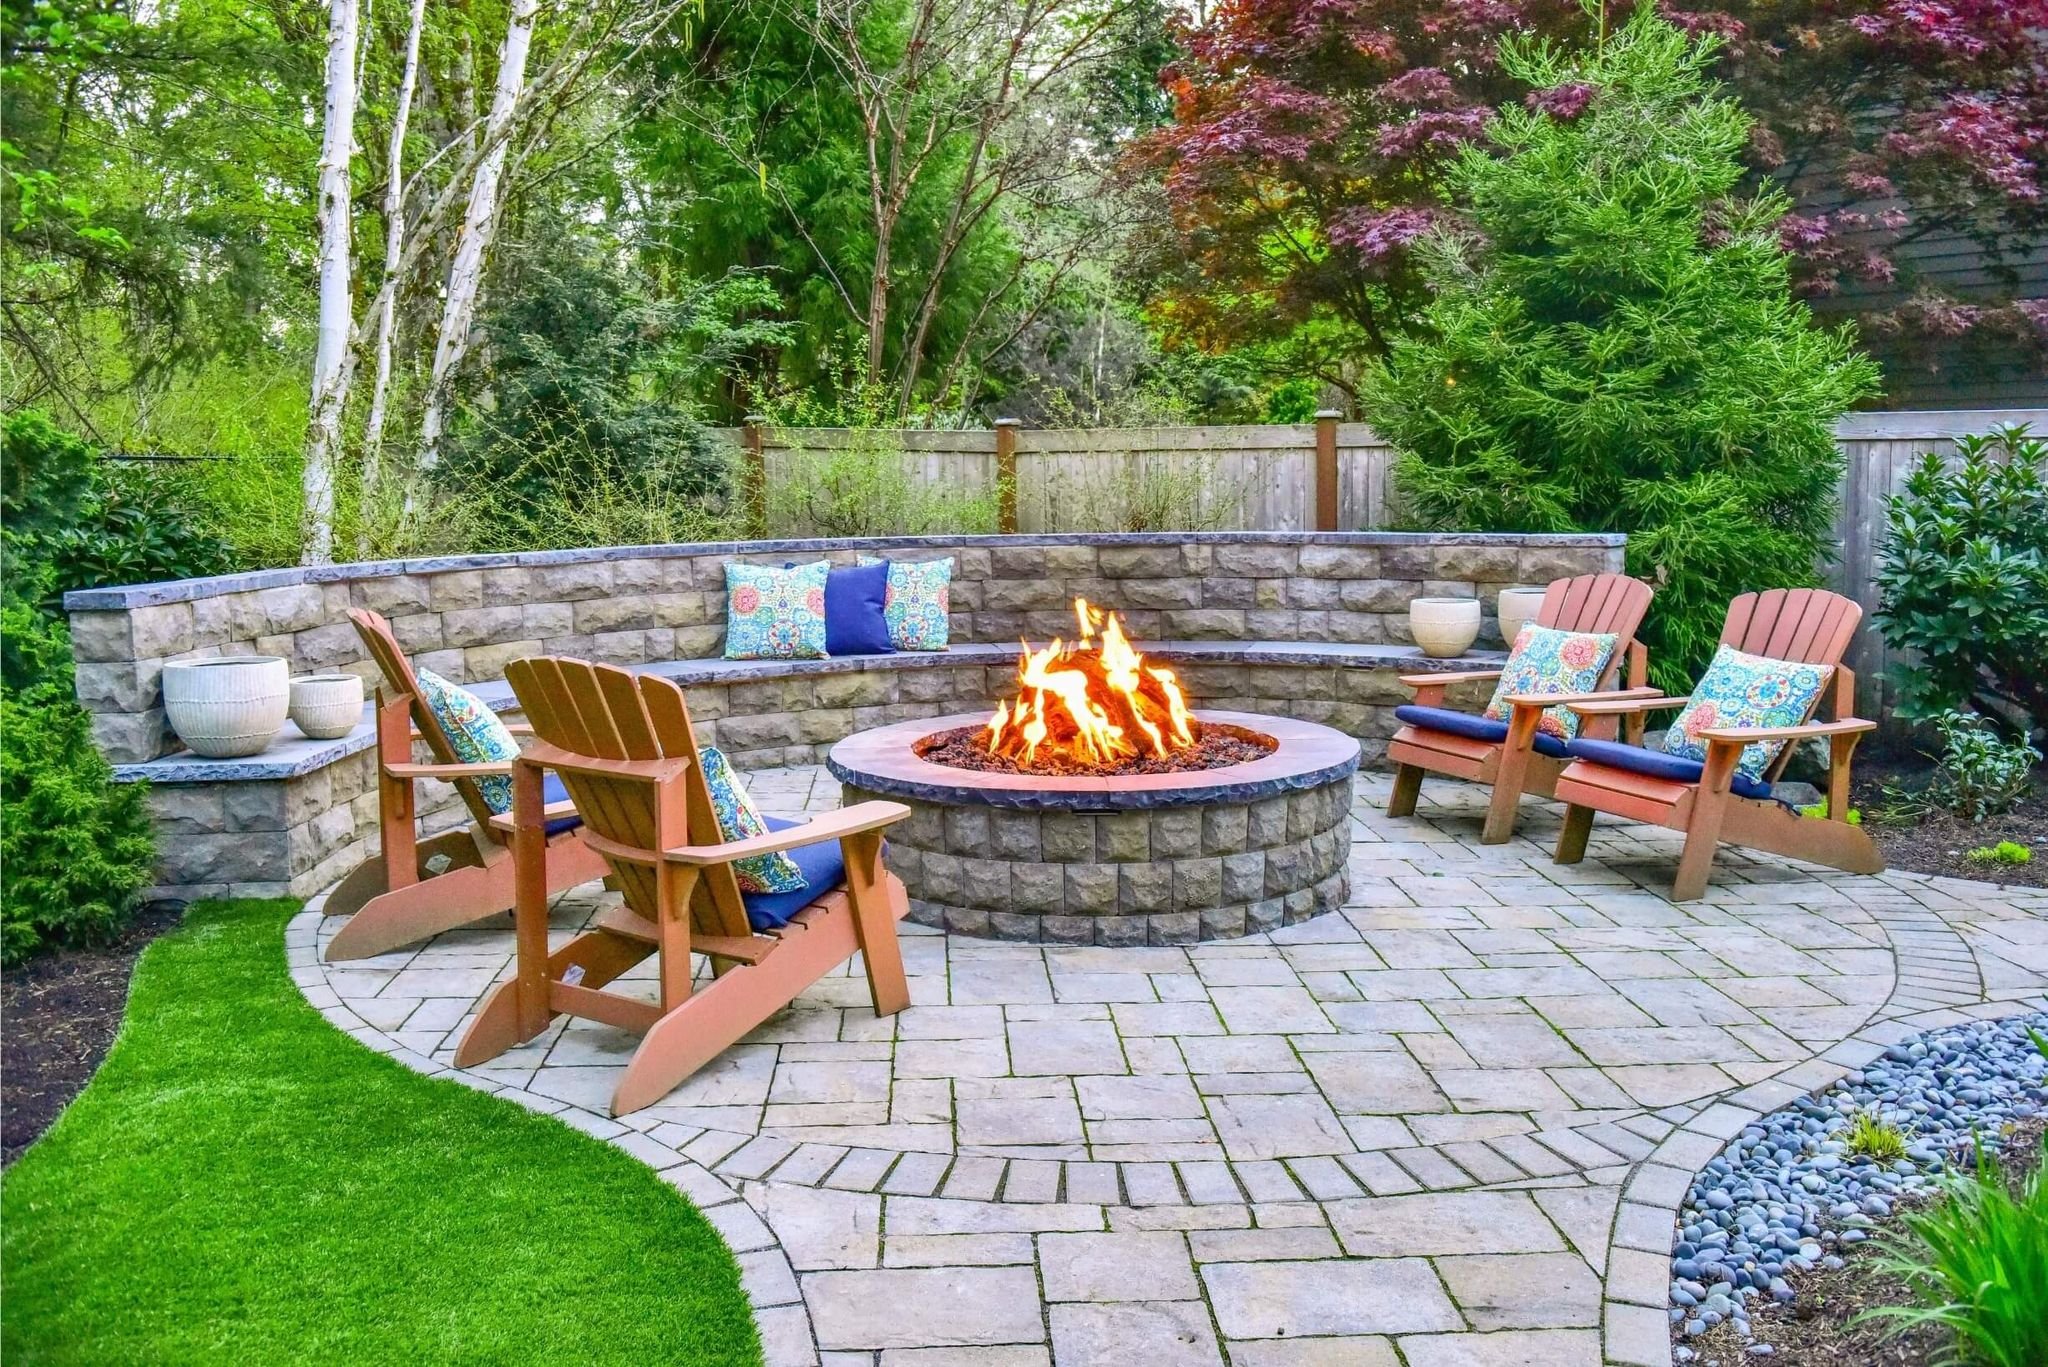 FIREPITS AND OUTDOOR OVENS